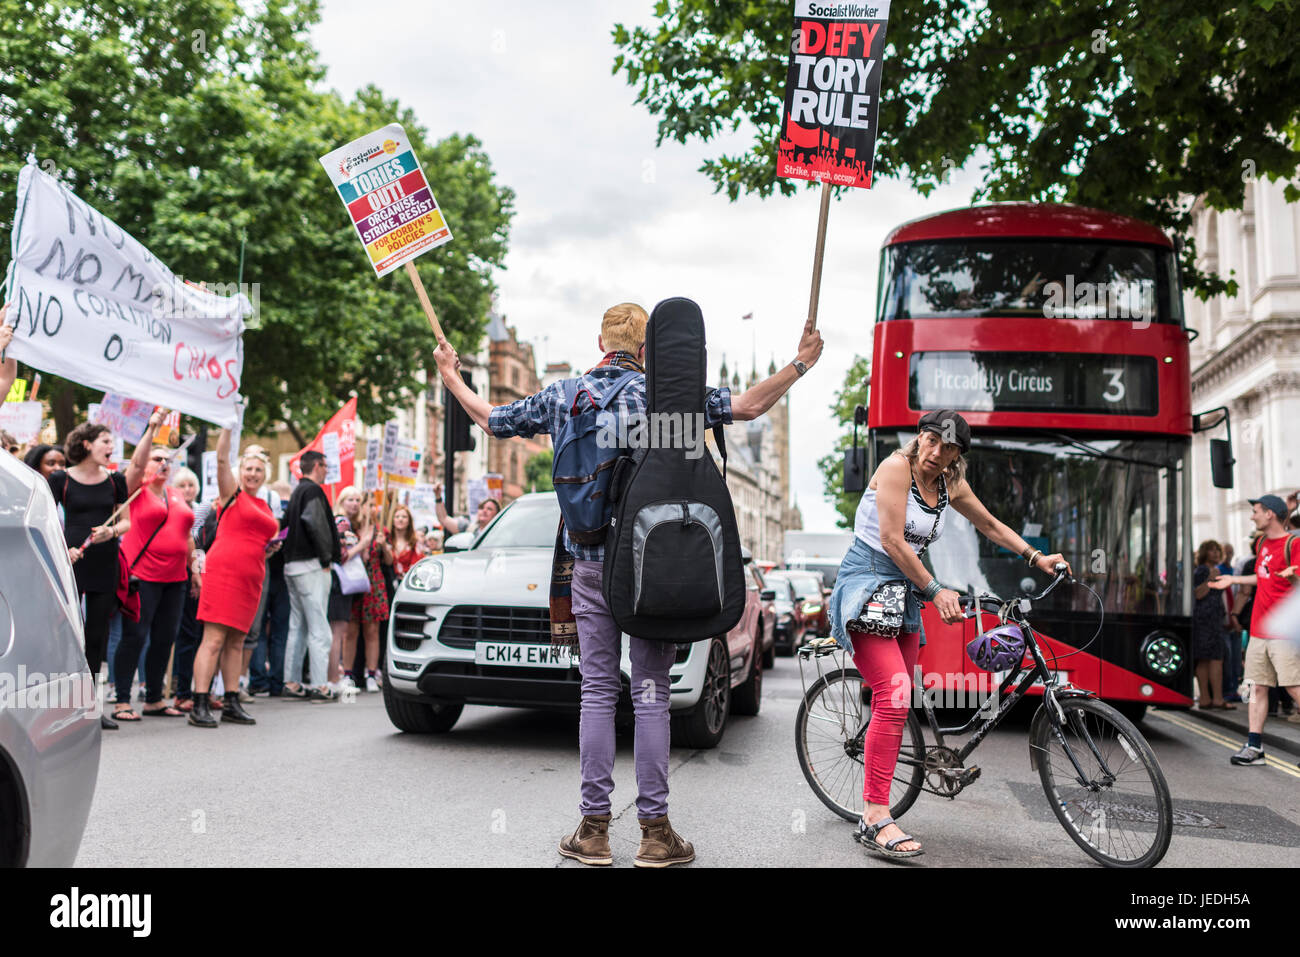 London, UK, 24th June 2017. Young people protest in front of Downing Street against the Tory government which is trying to create an alliance with the DUP. Credit: onebluelight.com/Alamy Live News Stock Photo